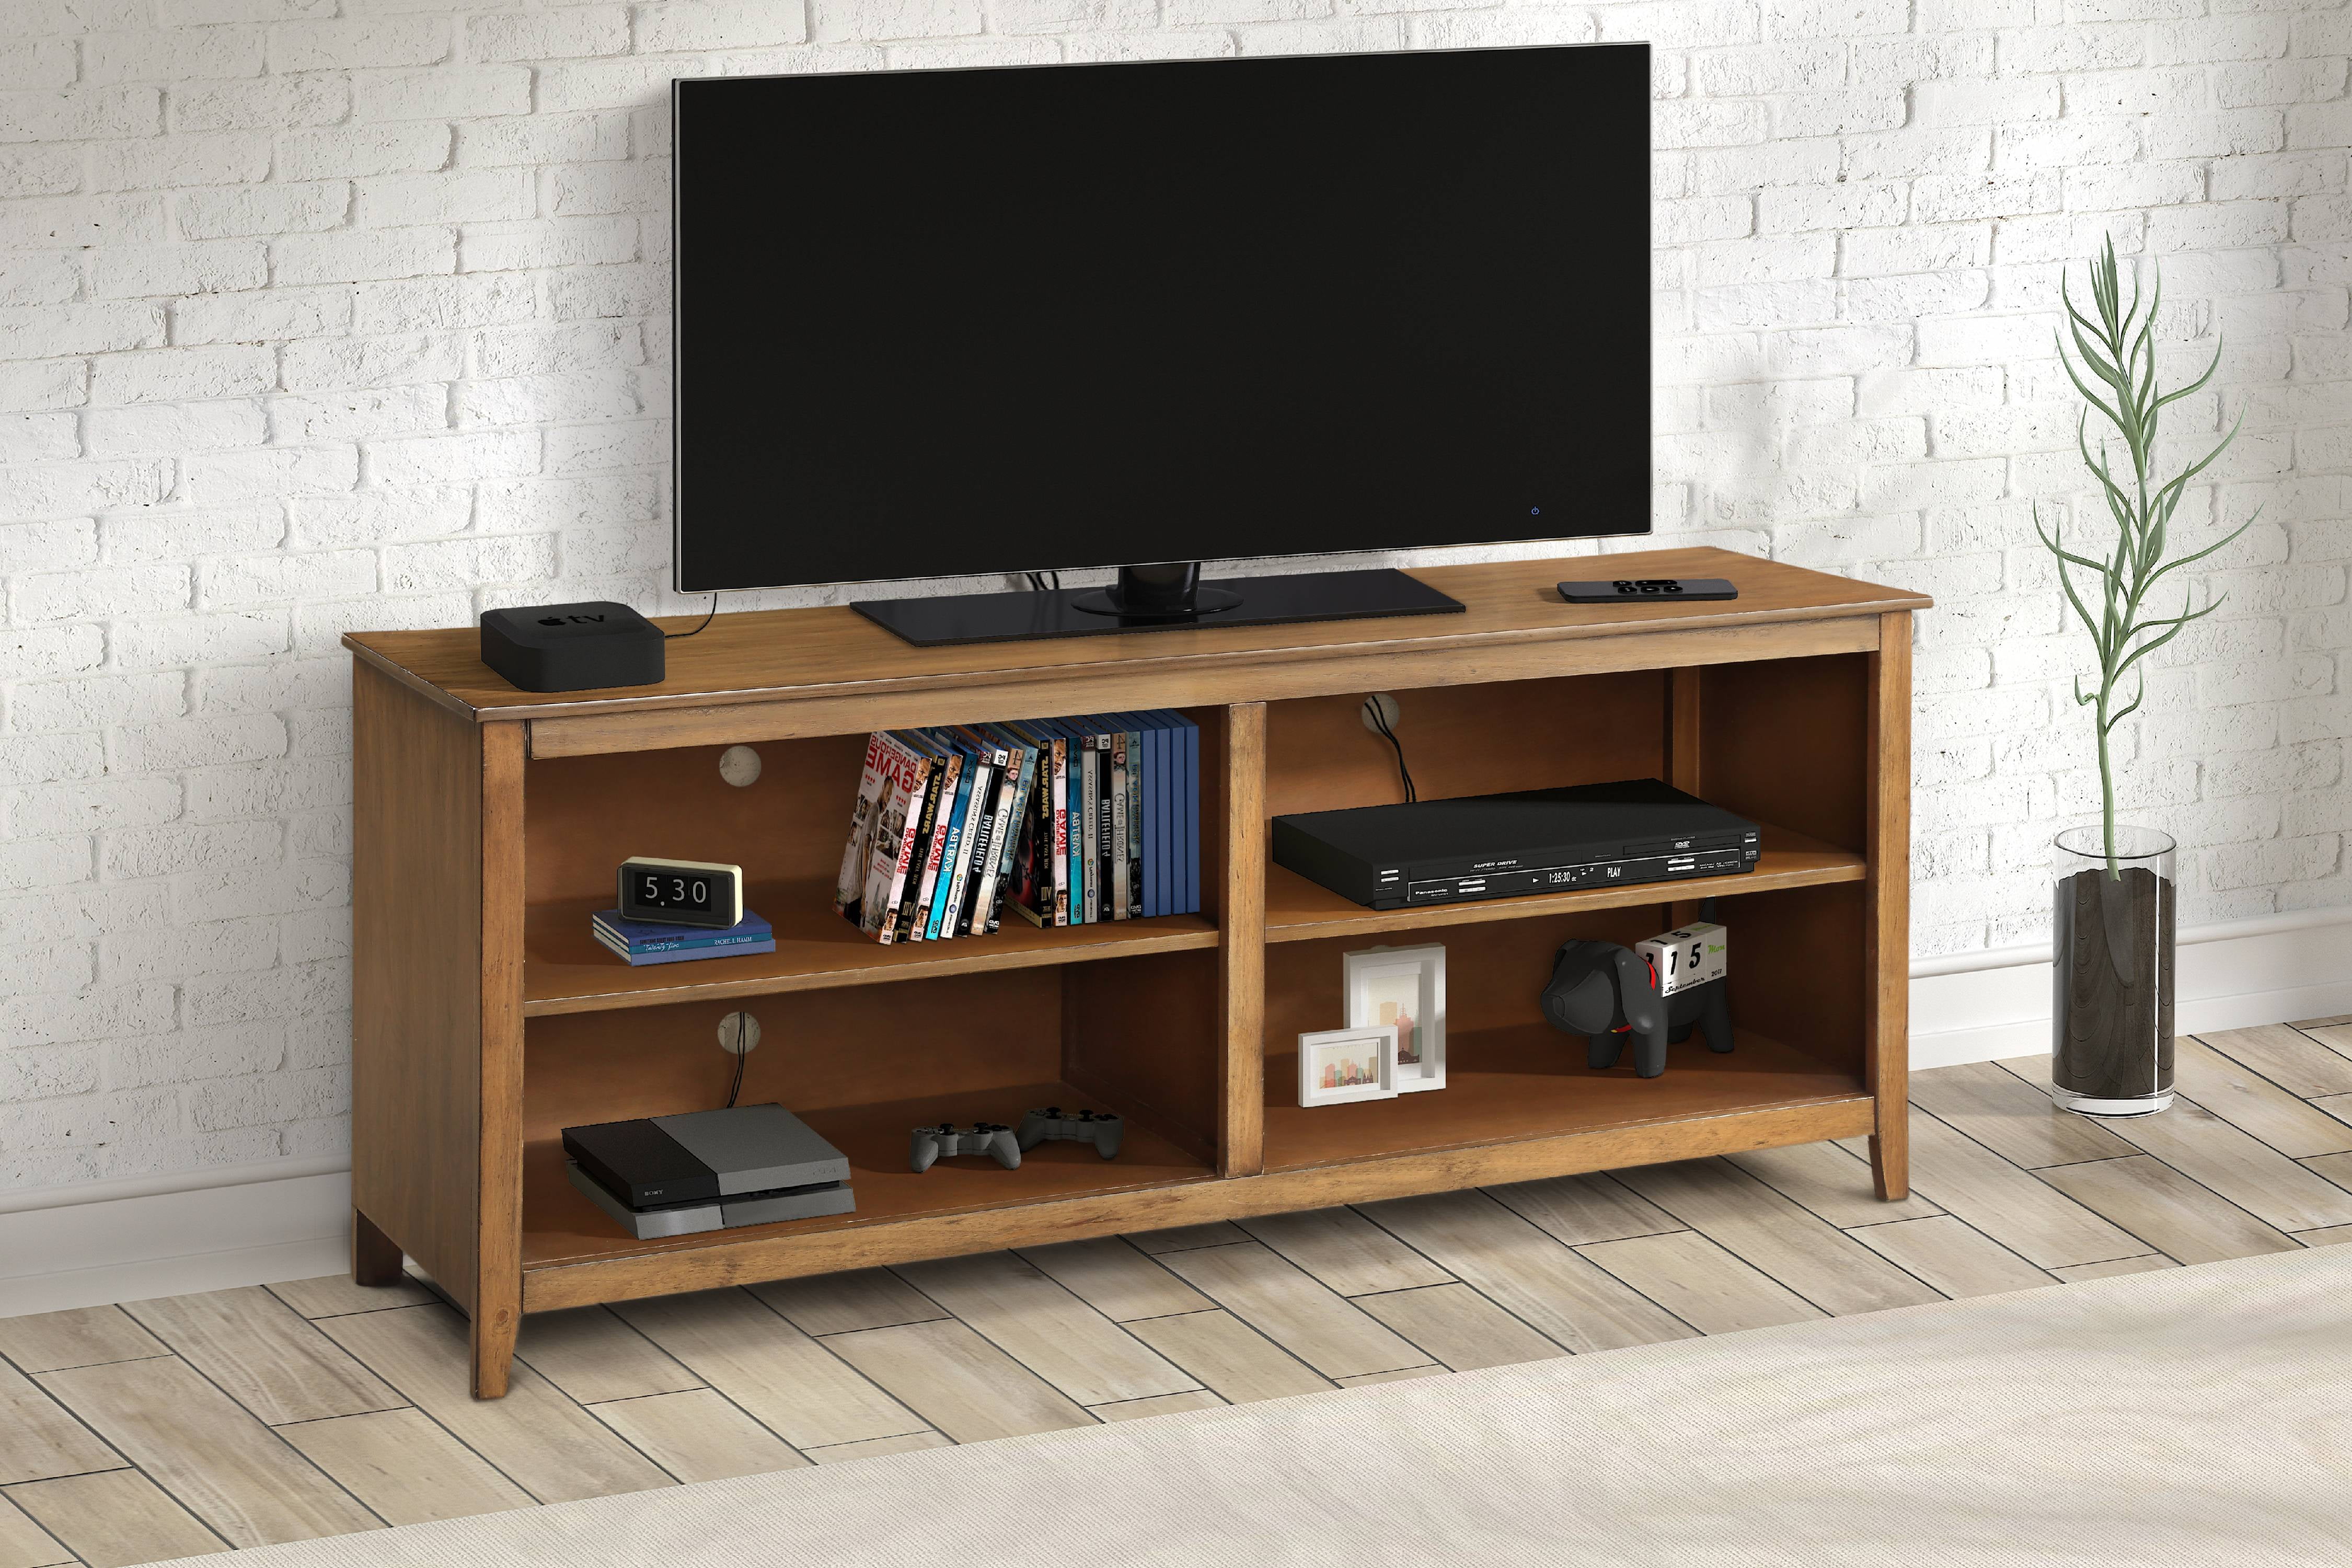 Tv Stand With Storage For Living Room